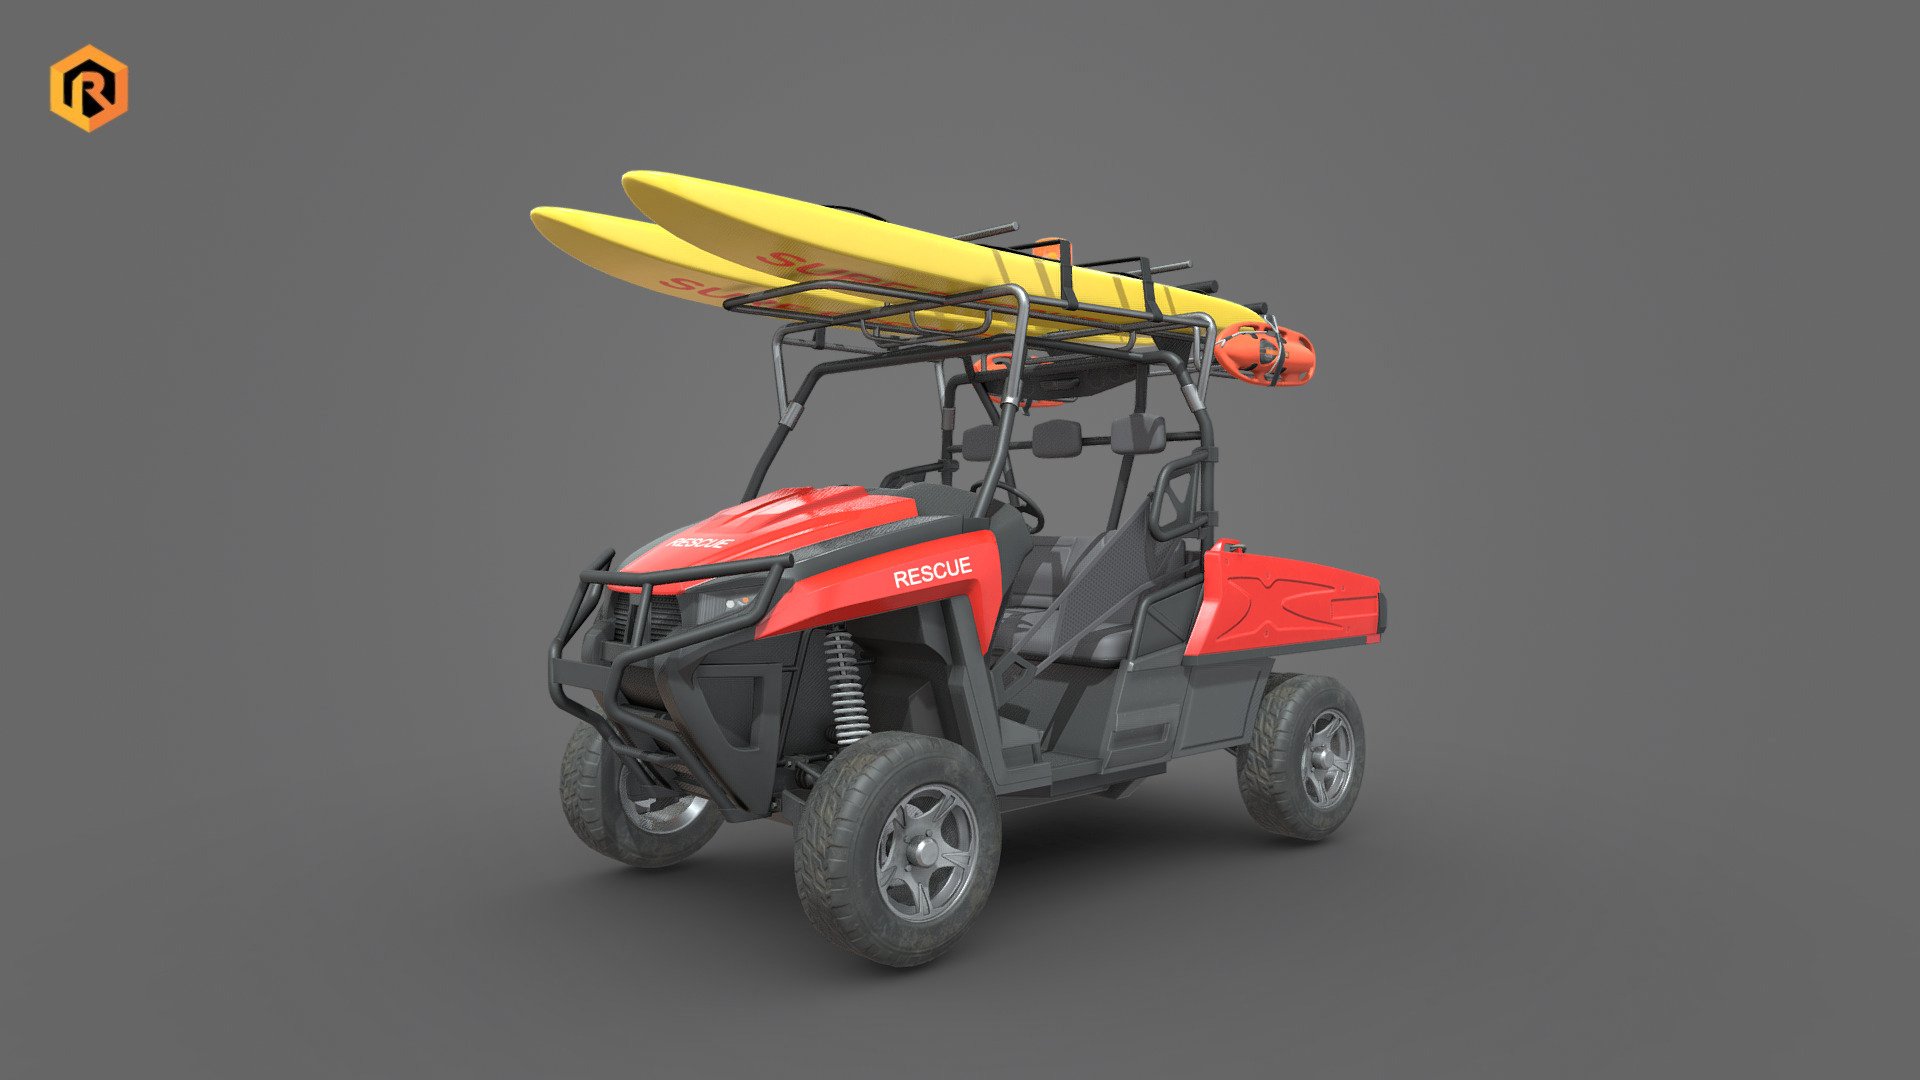 Mid-poly PBR 3D model of lifeguard buggy wIth buoys and boards.

The model is divided into several elements to make it easier to customize, rig, and animate.  

Technical details:


5 PBR textures sets (Main Body, Emission, Addons, Alpha, Wheel)
58731 Triangles
Model is divided into a few meshes (Main vehicle, boards, buoys, wheels, steering wheel)
Model is fully textured with all materials applied.
Pivot points are correctly placed to suit the optional animation process.
Lot of additional file formats included (Blender, Unity, Unreal 4, Maya etc.)   

PBR texture sets details (Albedo, Metallic, Smoothness, Normal, AO):


4096 Main Body  texture set
1024 Emission  texture set 
2048 Addons texture set
1024 Alpha texture set
2048 Wheel texture set 

More file formats are available in additional zip file on product page.

Please feel free to contact me if you have any questions or need any support for this asset.

Support e-mail: support@rescue3d.com - Lifeguard Vehicle WIth Buoys And Boards - Buy Royalty Free 3D model by Rescue3D Assets (@rescue3d) 3d model